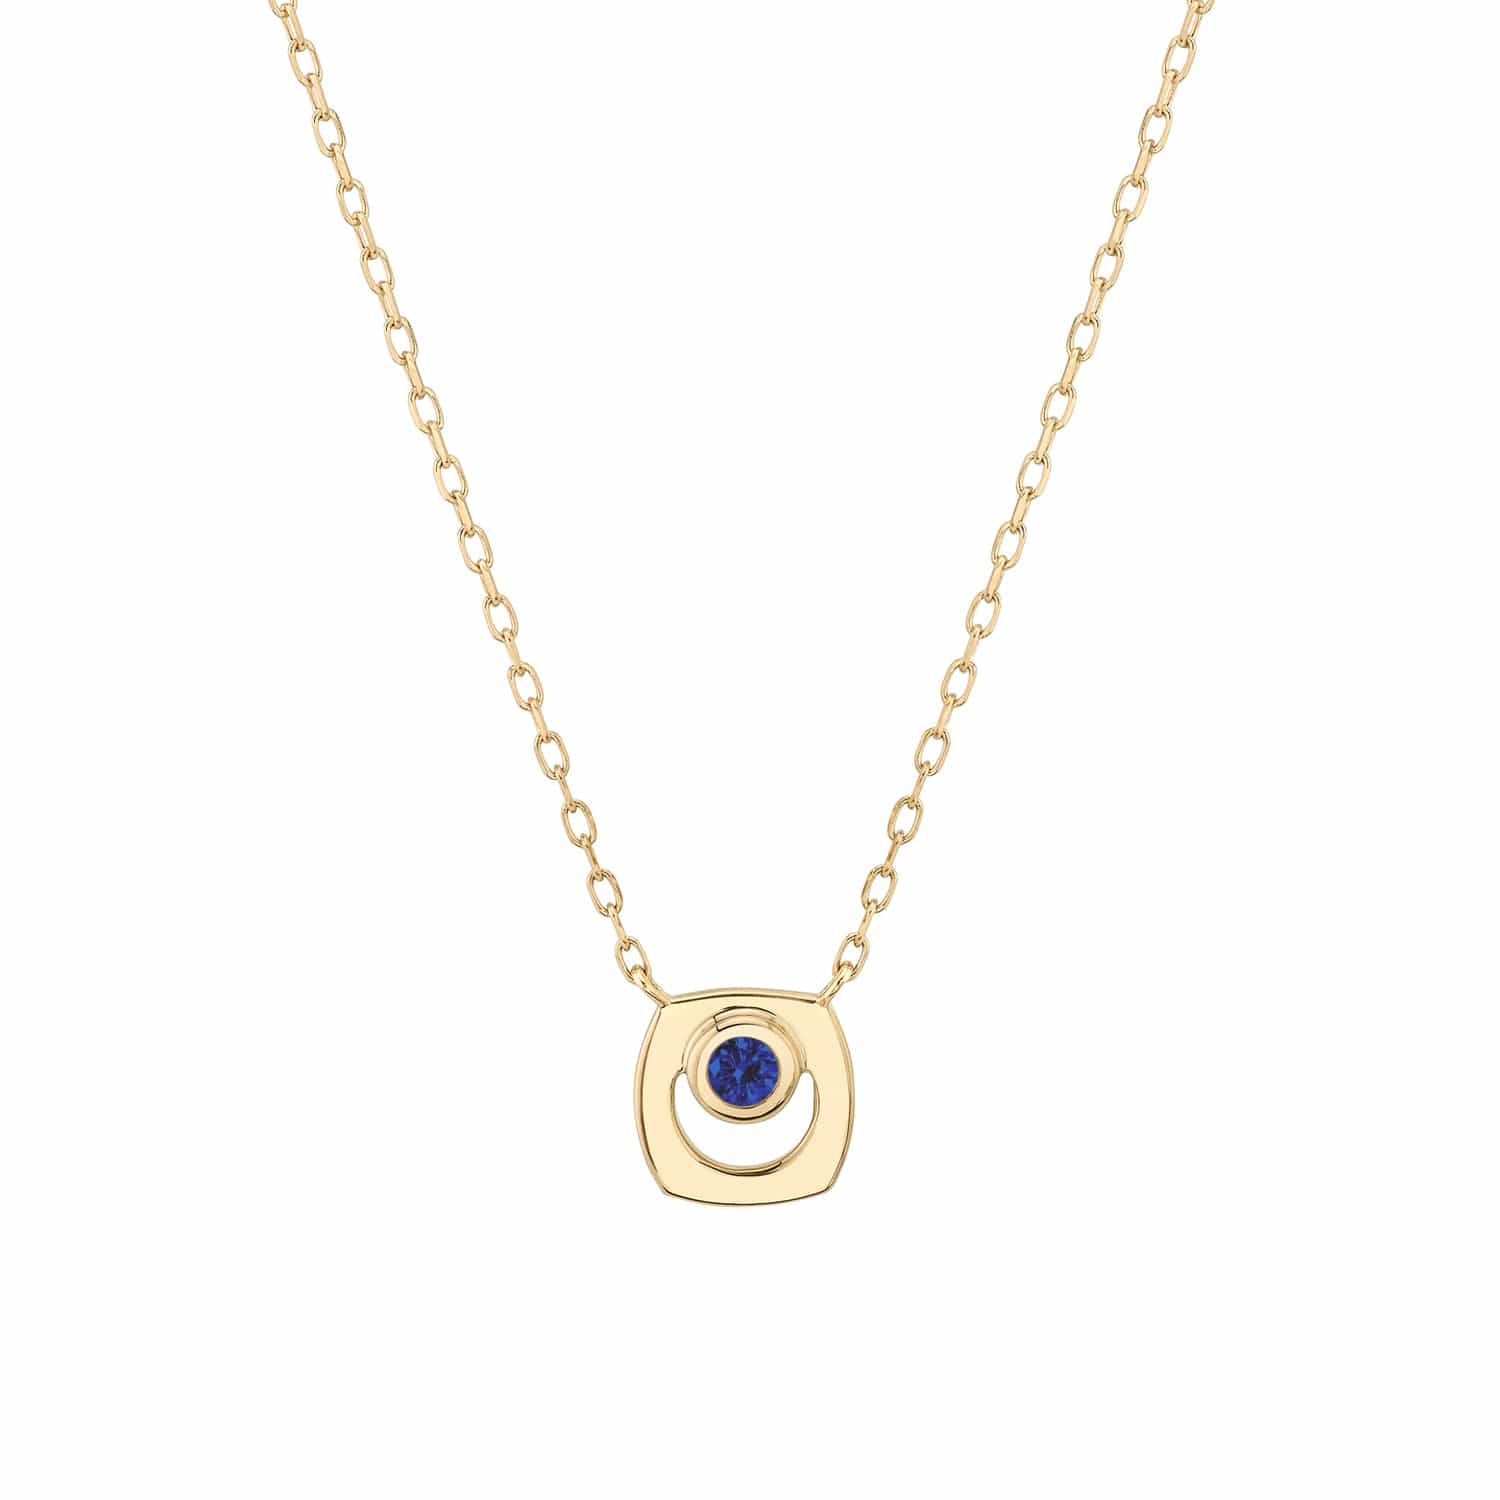 MICHAEL M Necklaces 14K Yellow Gold / Sapphire - September Signature Birthstone Necklace CN435SA